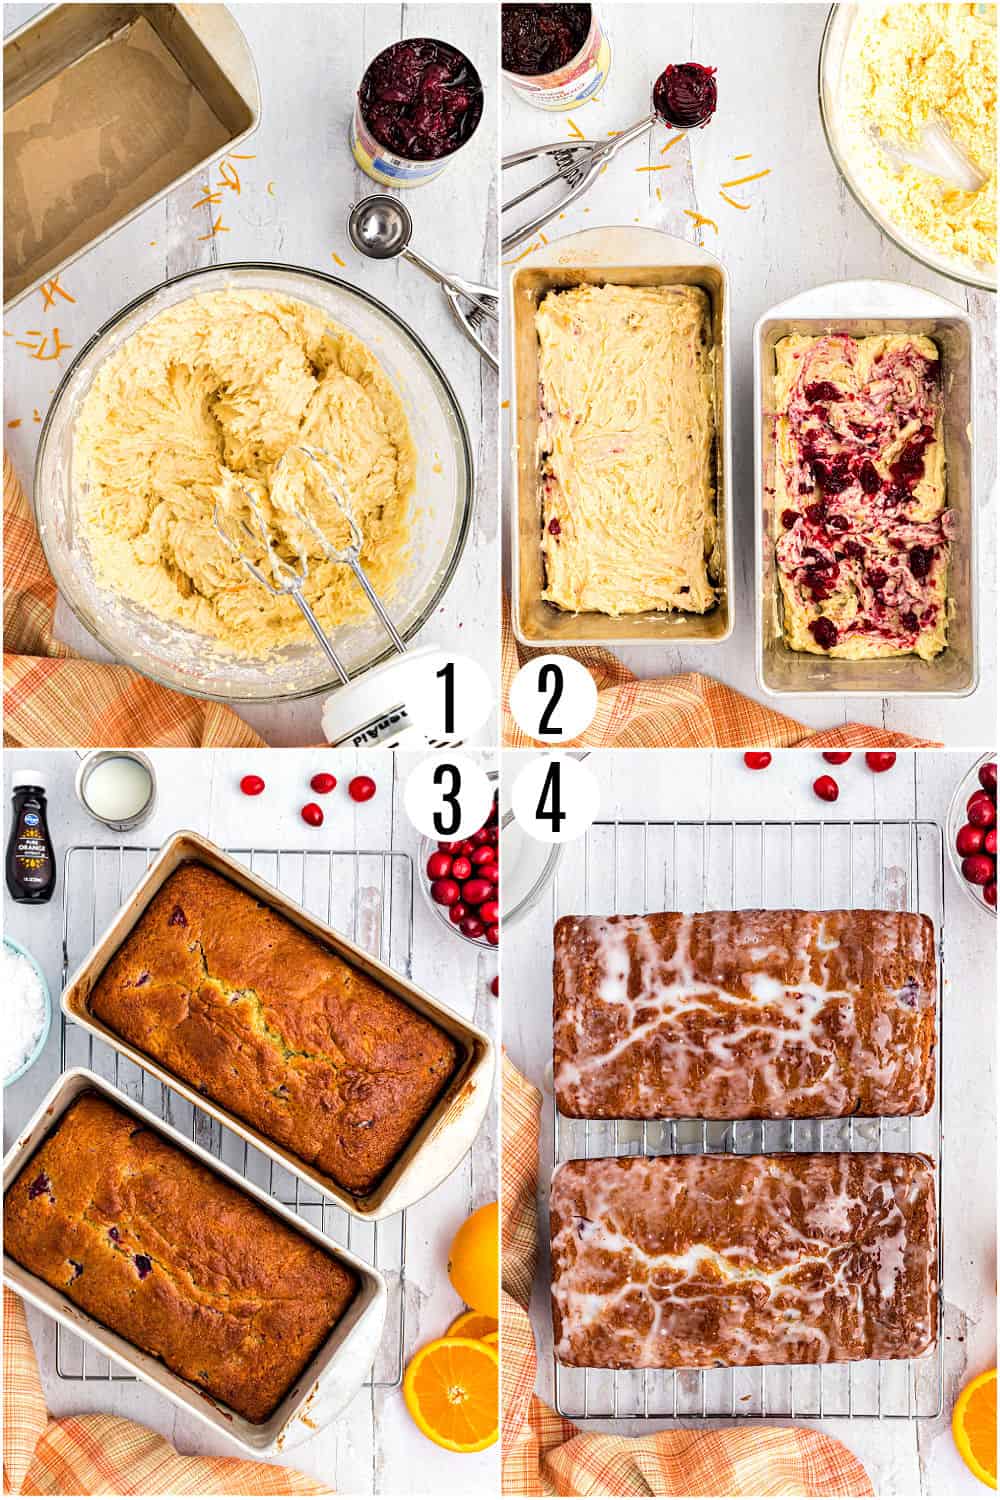 Step by step photos showing how to make cranberry bread.